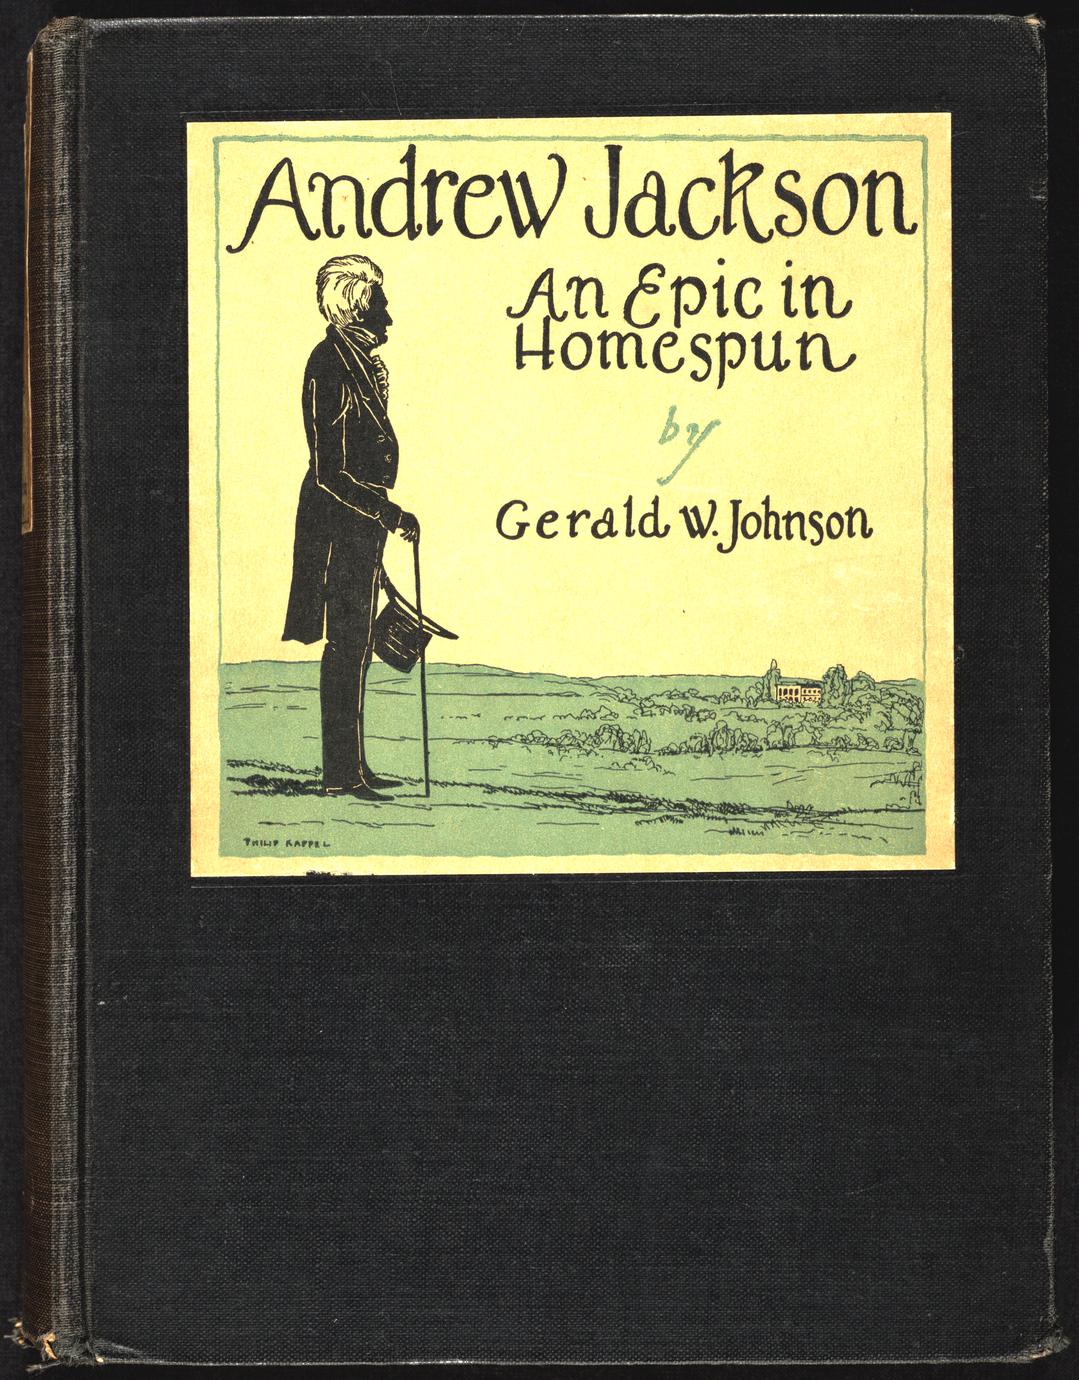 Andrew Jackson, an epic in homespun (1 of 4)